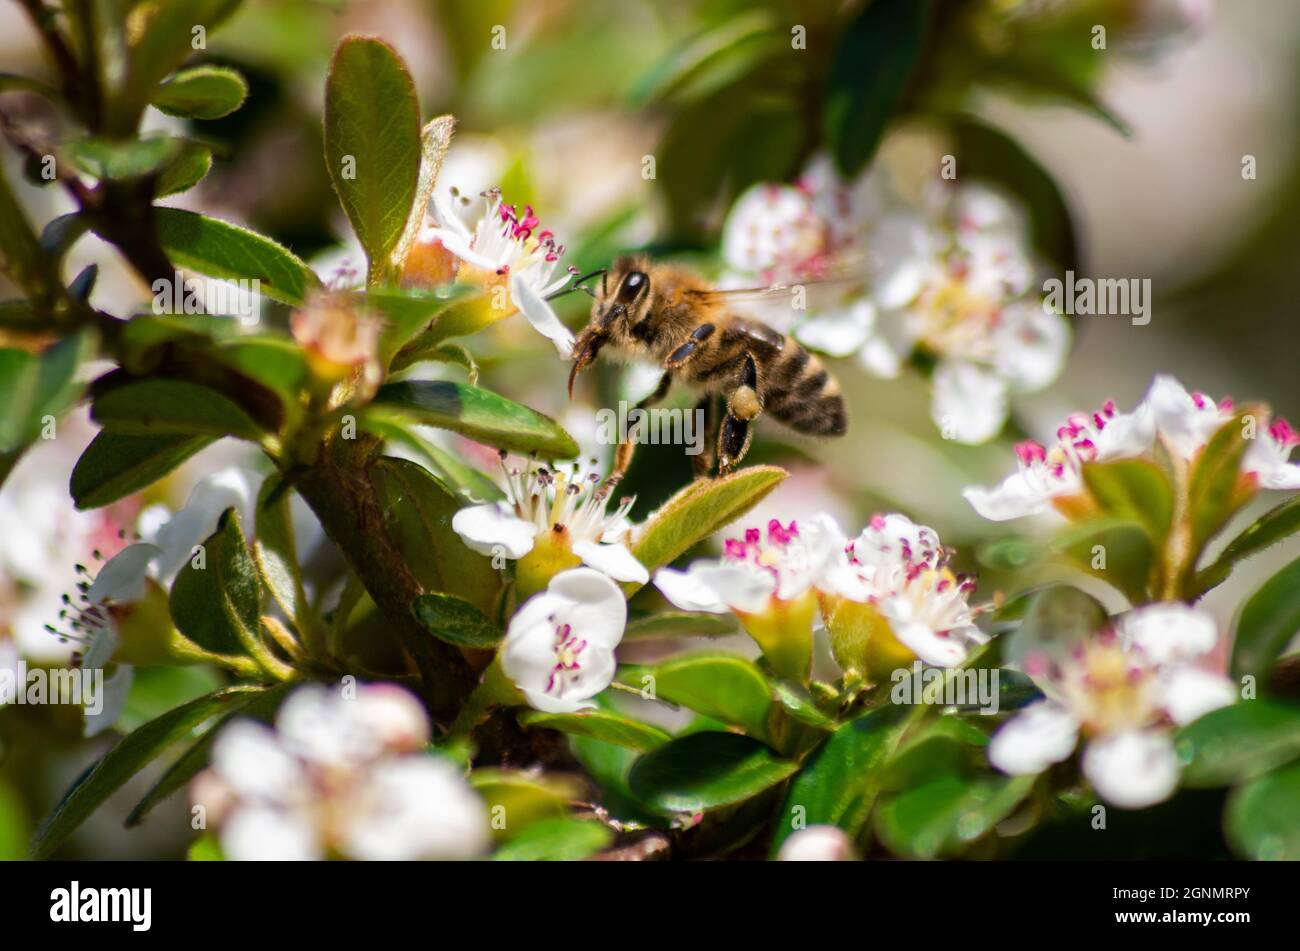 A bee sipping nectar from the Chokeberry flowers in the garden Stock Photo